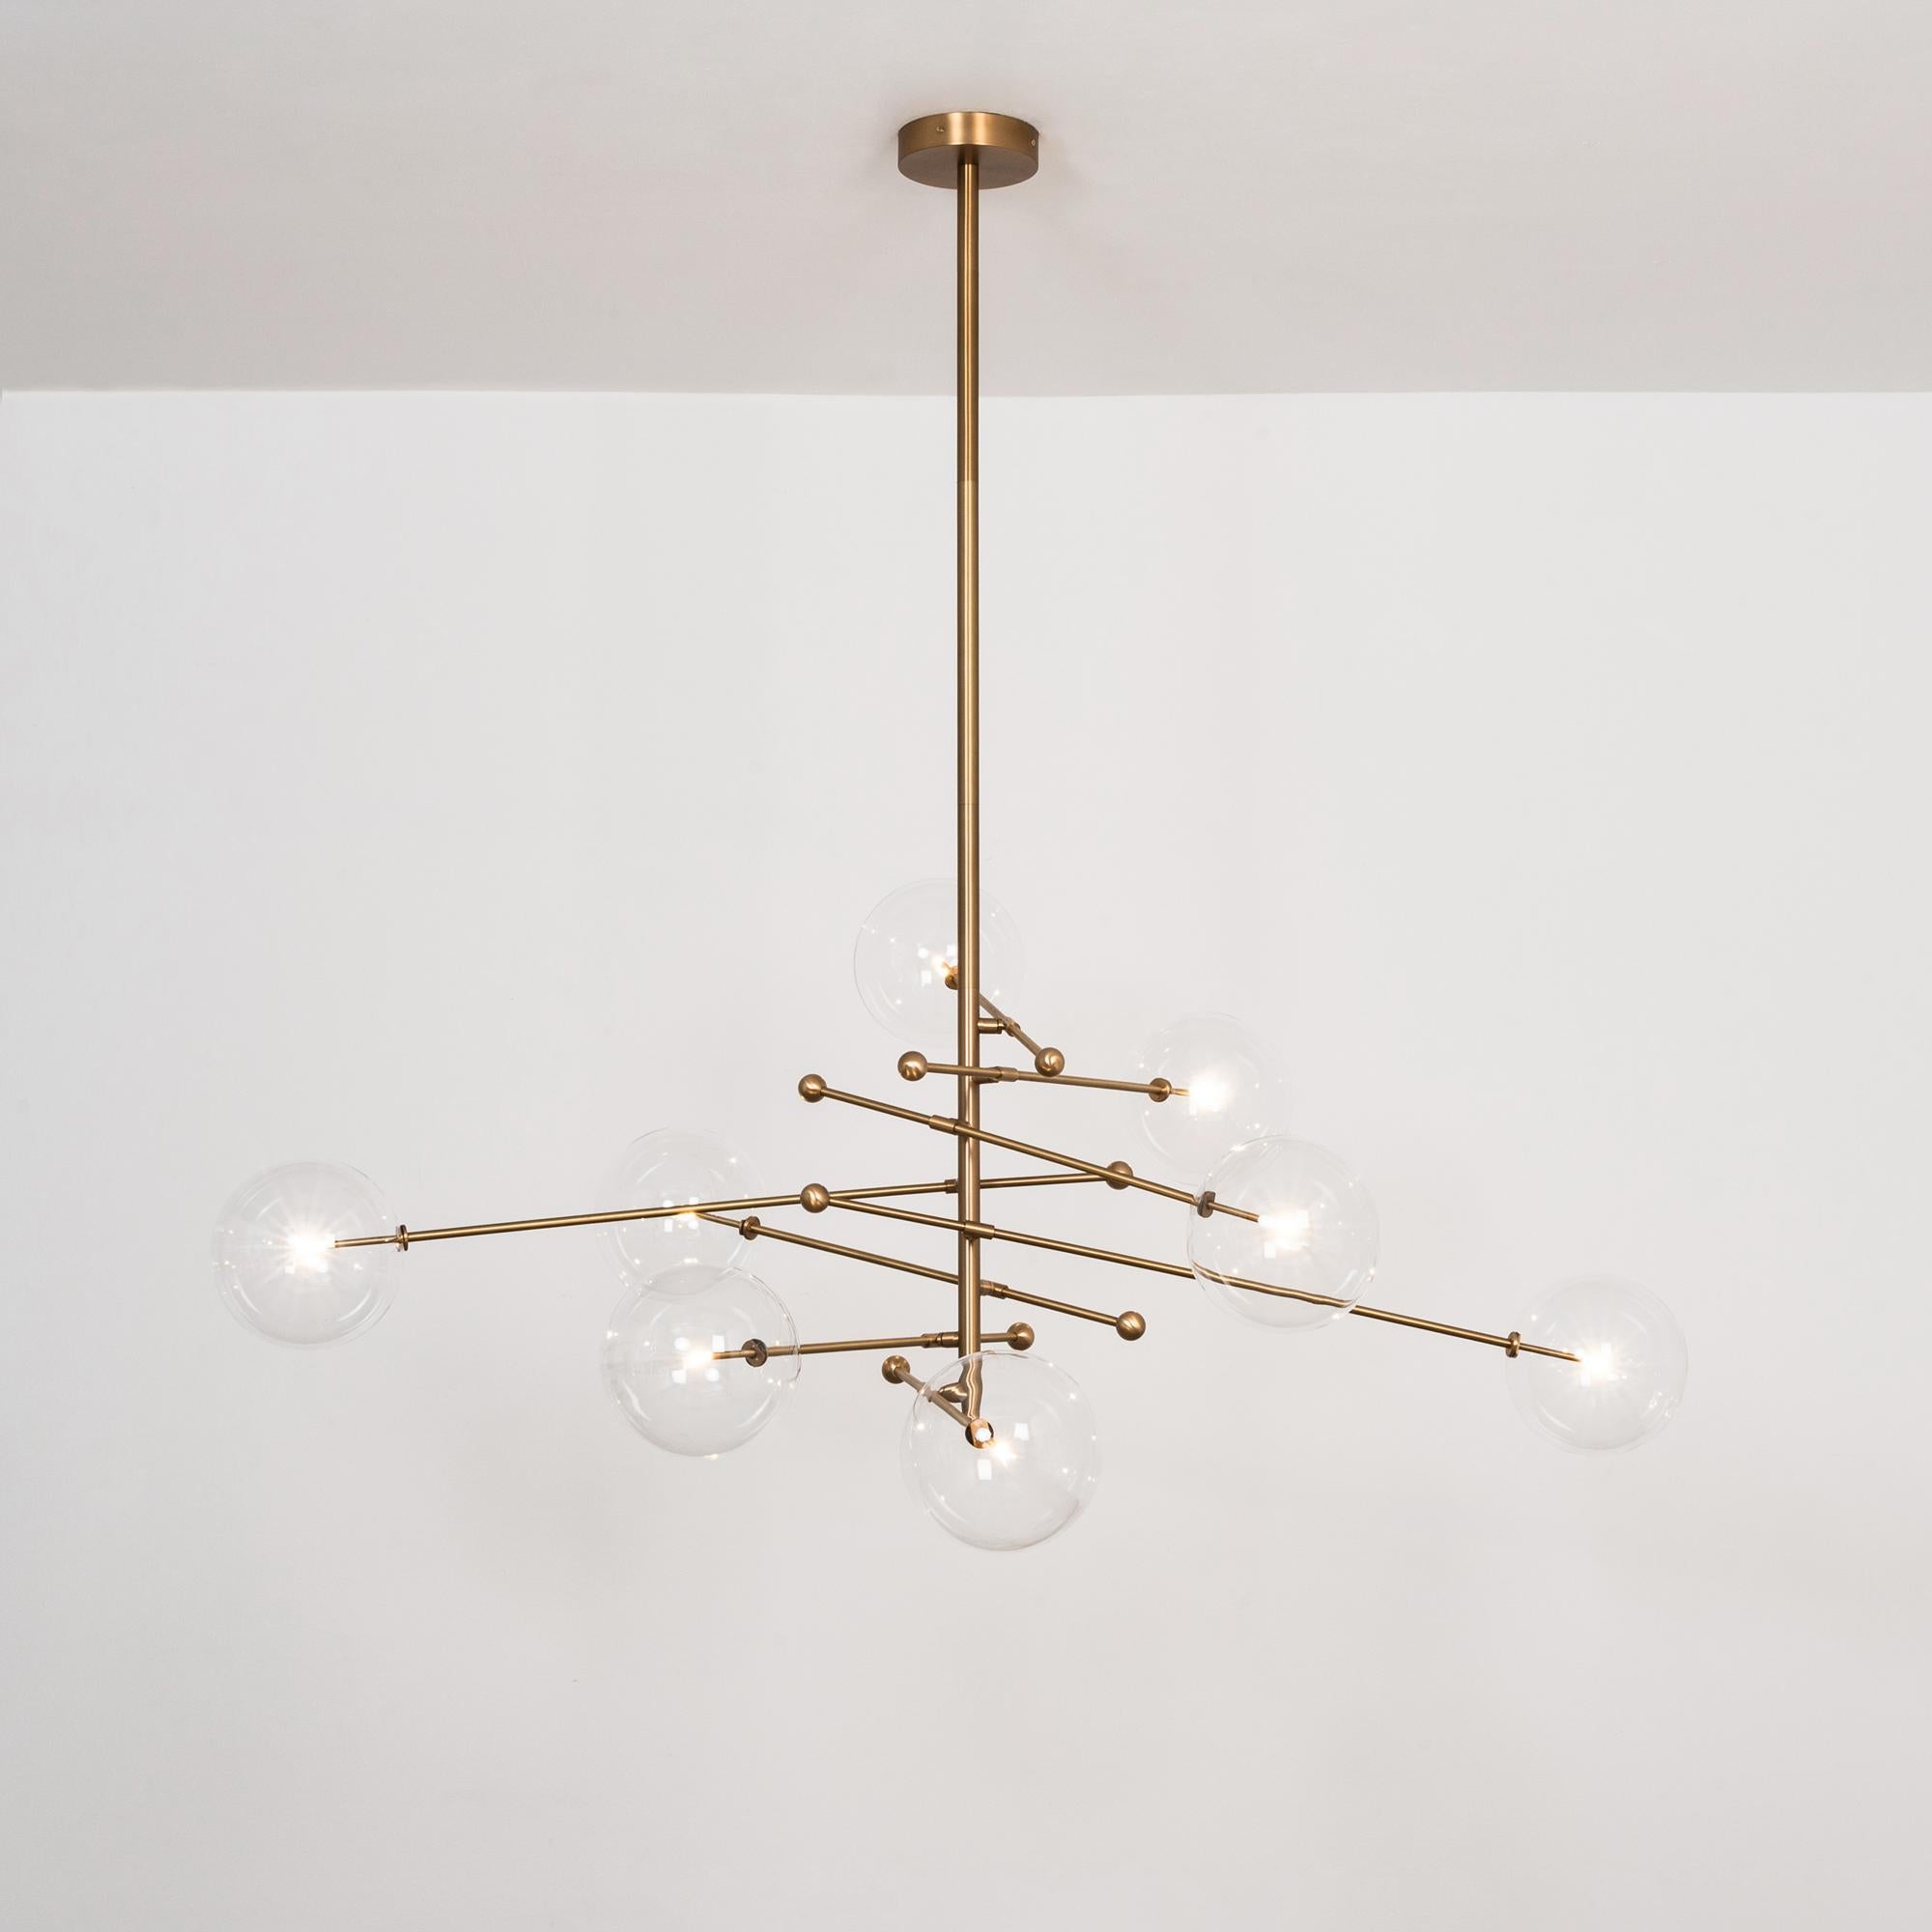 RD15 8 Arms Chandelier by Schwung
Dimensions: W 200 x H 180
Materials: Solid brass, hand blown glass globes
Lamp: 8 x max 10W G4, 12V (bulbs included)

 
Schwung is a German word, and loosely defined, means energy or momentumm of a positive